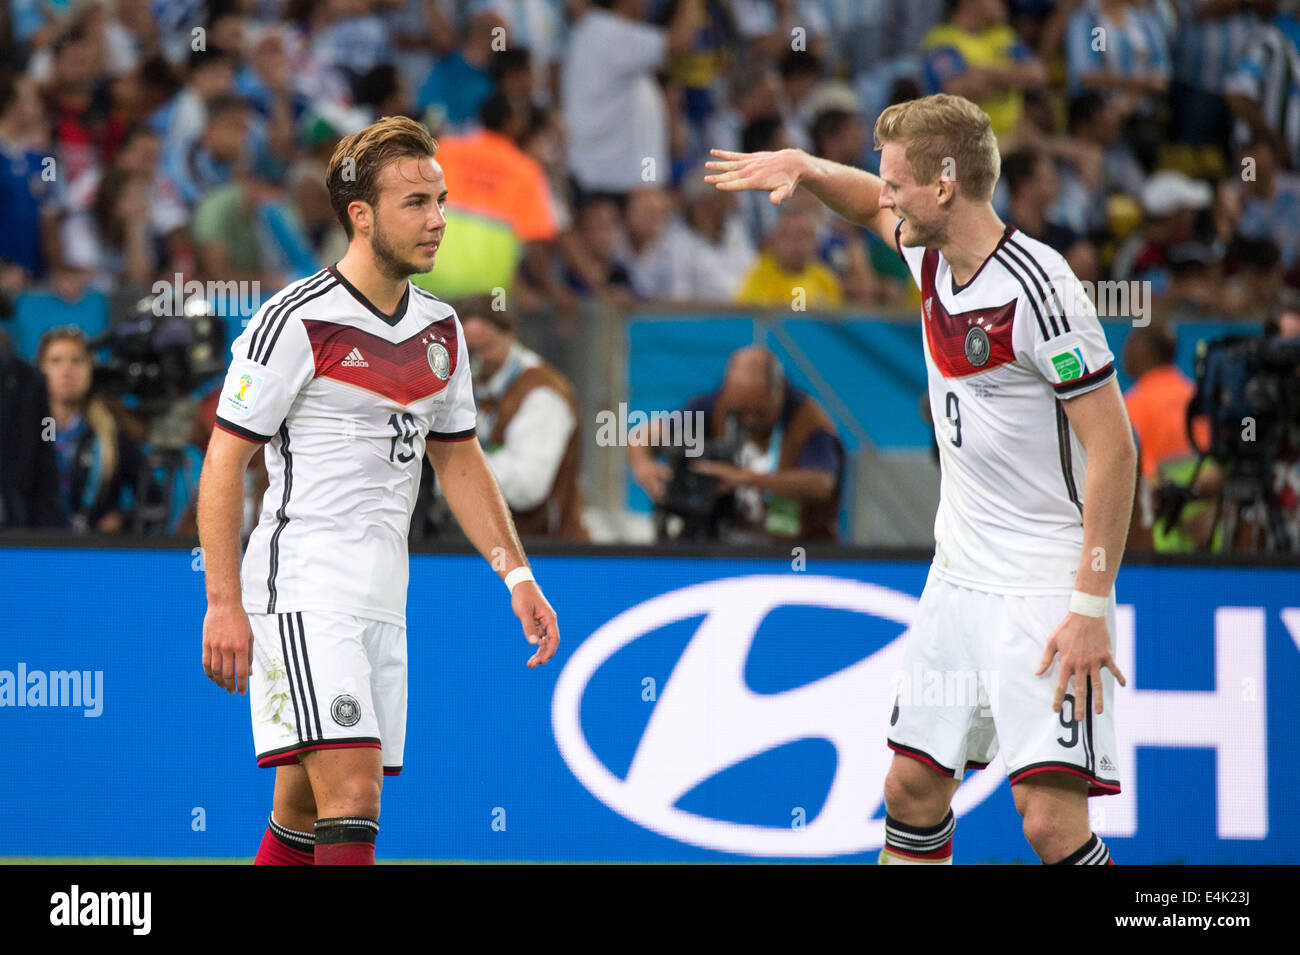 (L-R) Mario Gotze, Andre Schurrle (GER), JULY 13, 2014 - Football / Soccer : Mario Gotze of Germany celebrates after scoring his side first goal during the FIFA World Cup Brazil 2014 Final match between Germany 1-0 Argentina at the Maracana stadium in Rio de Janeiro, Brazil. (Photo by Maurizio Borsari/AFLO) Stock Photo